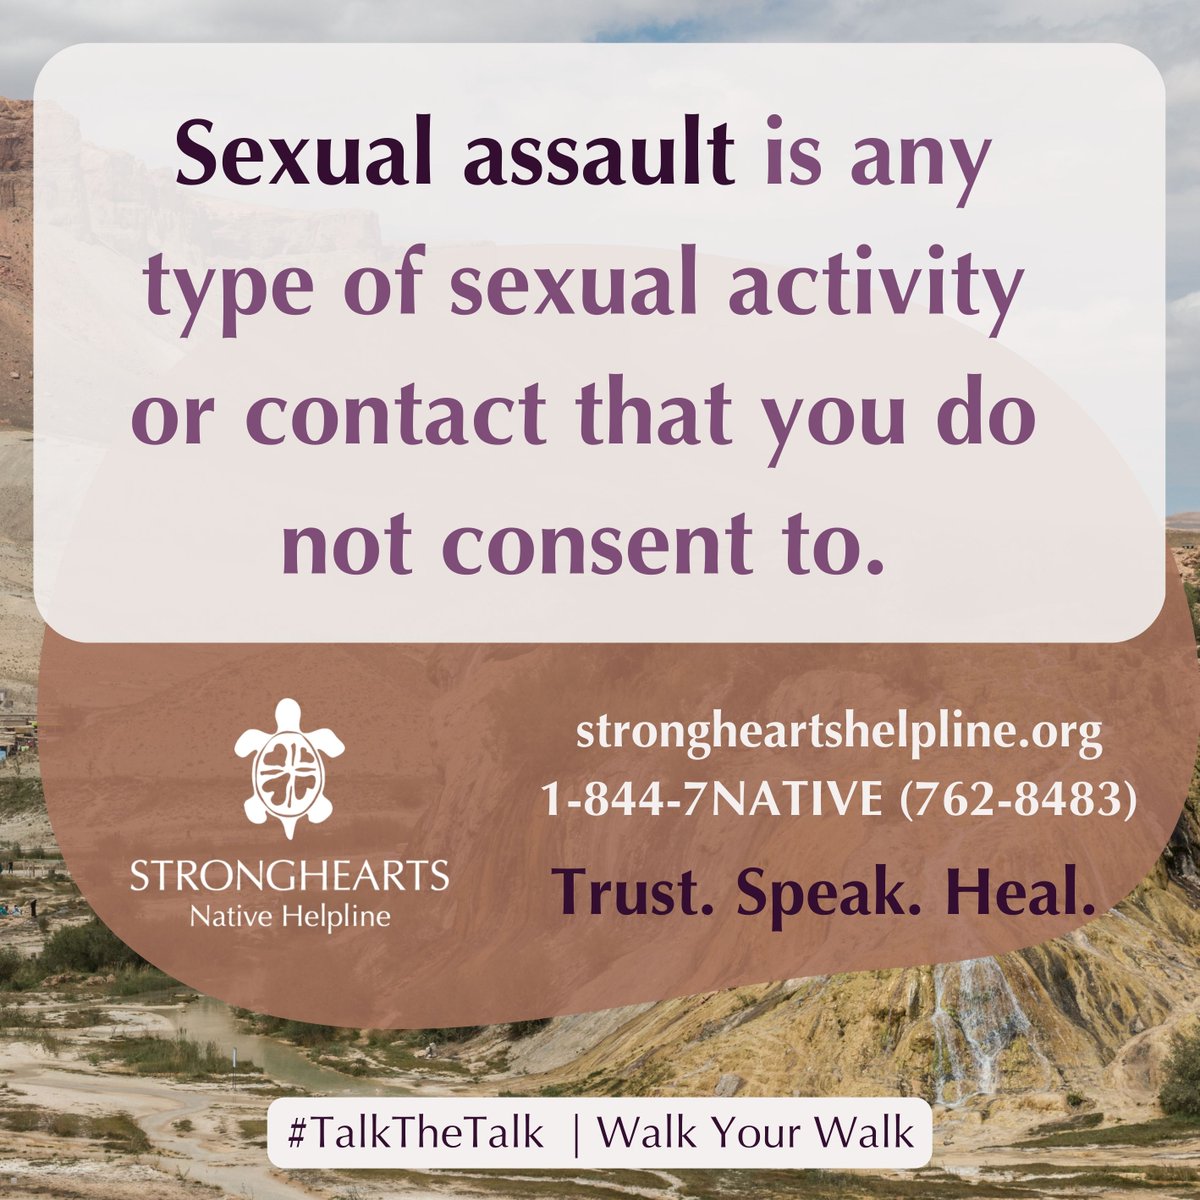 In an abusive relationship, some partners might sexually assault their partner or force them into unwanted sexual activity as a means of control. strongheartshelpline.org 1-844-7NATIVE (762-8483) #TalkTheTalk